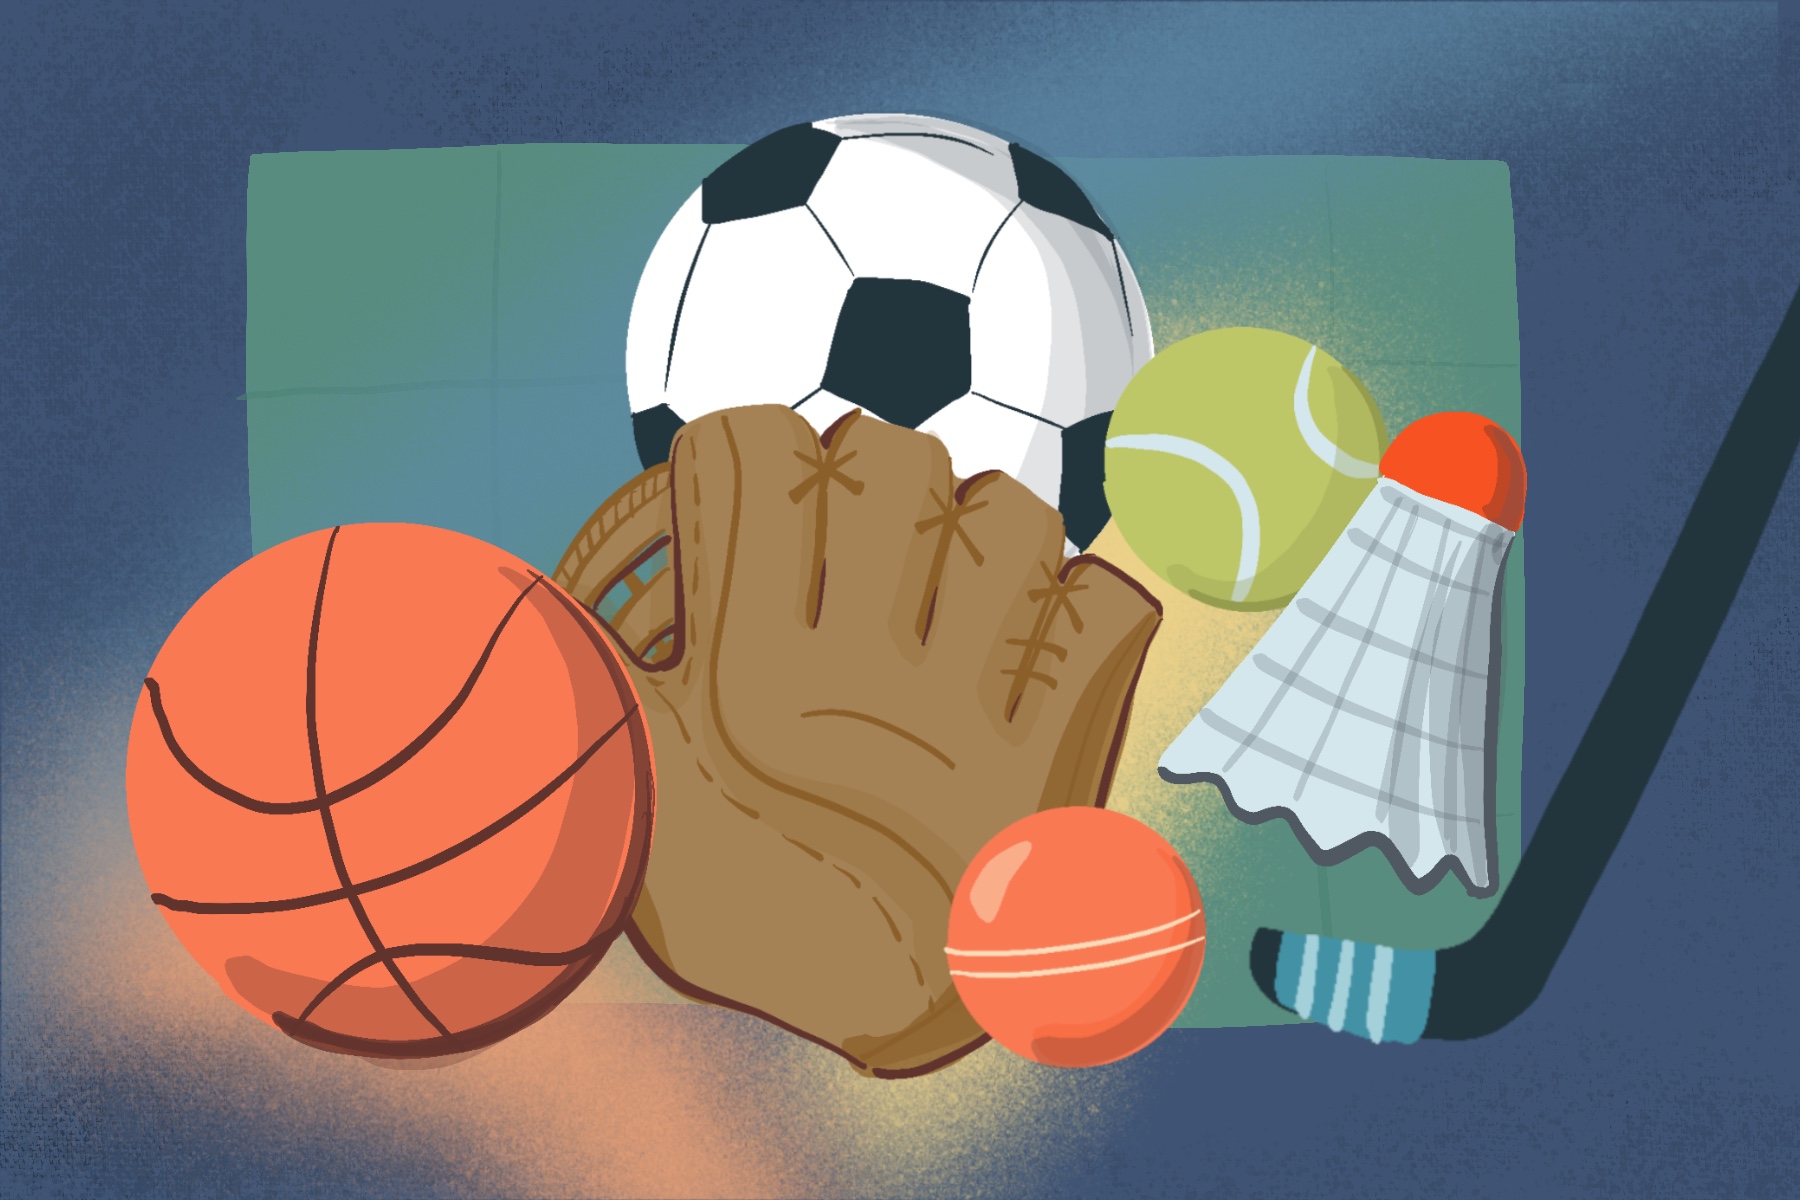 a An illustration of Weavly scene with several sports items on it, such as basketball ball, soccer ball, field hockey ball, tennis ball, hockey stick, and a badminton shuttlecock.